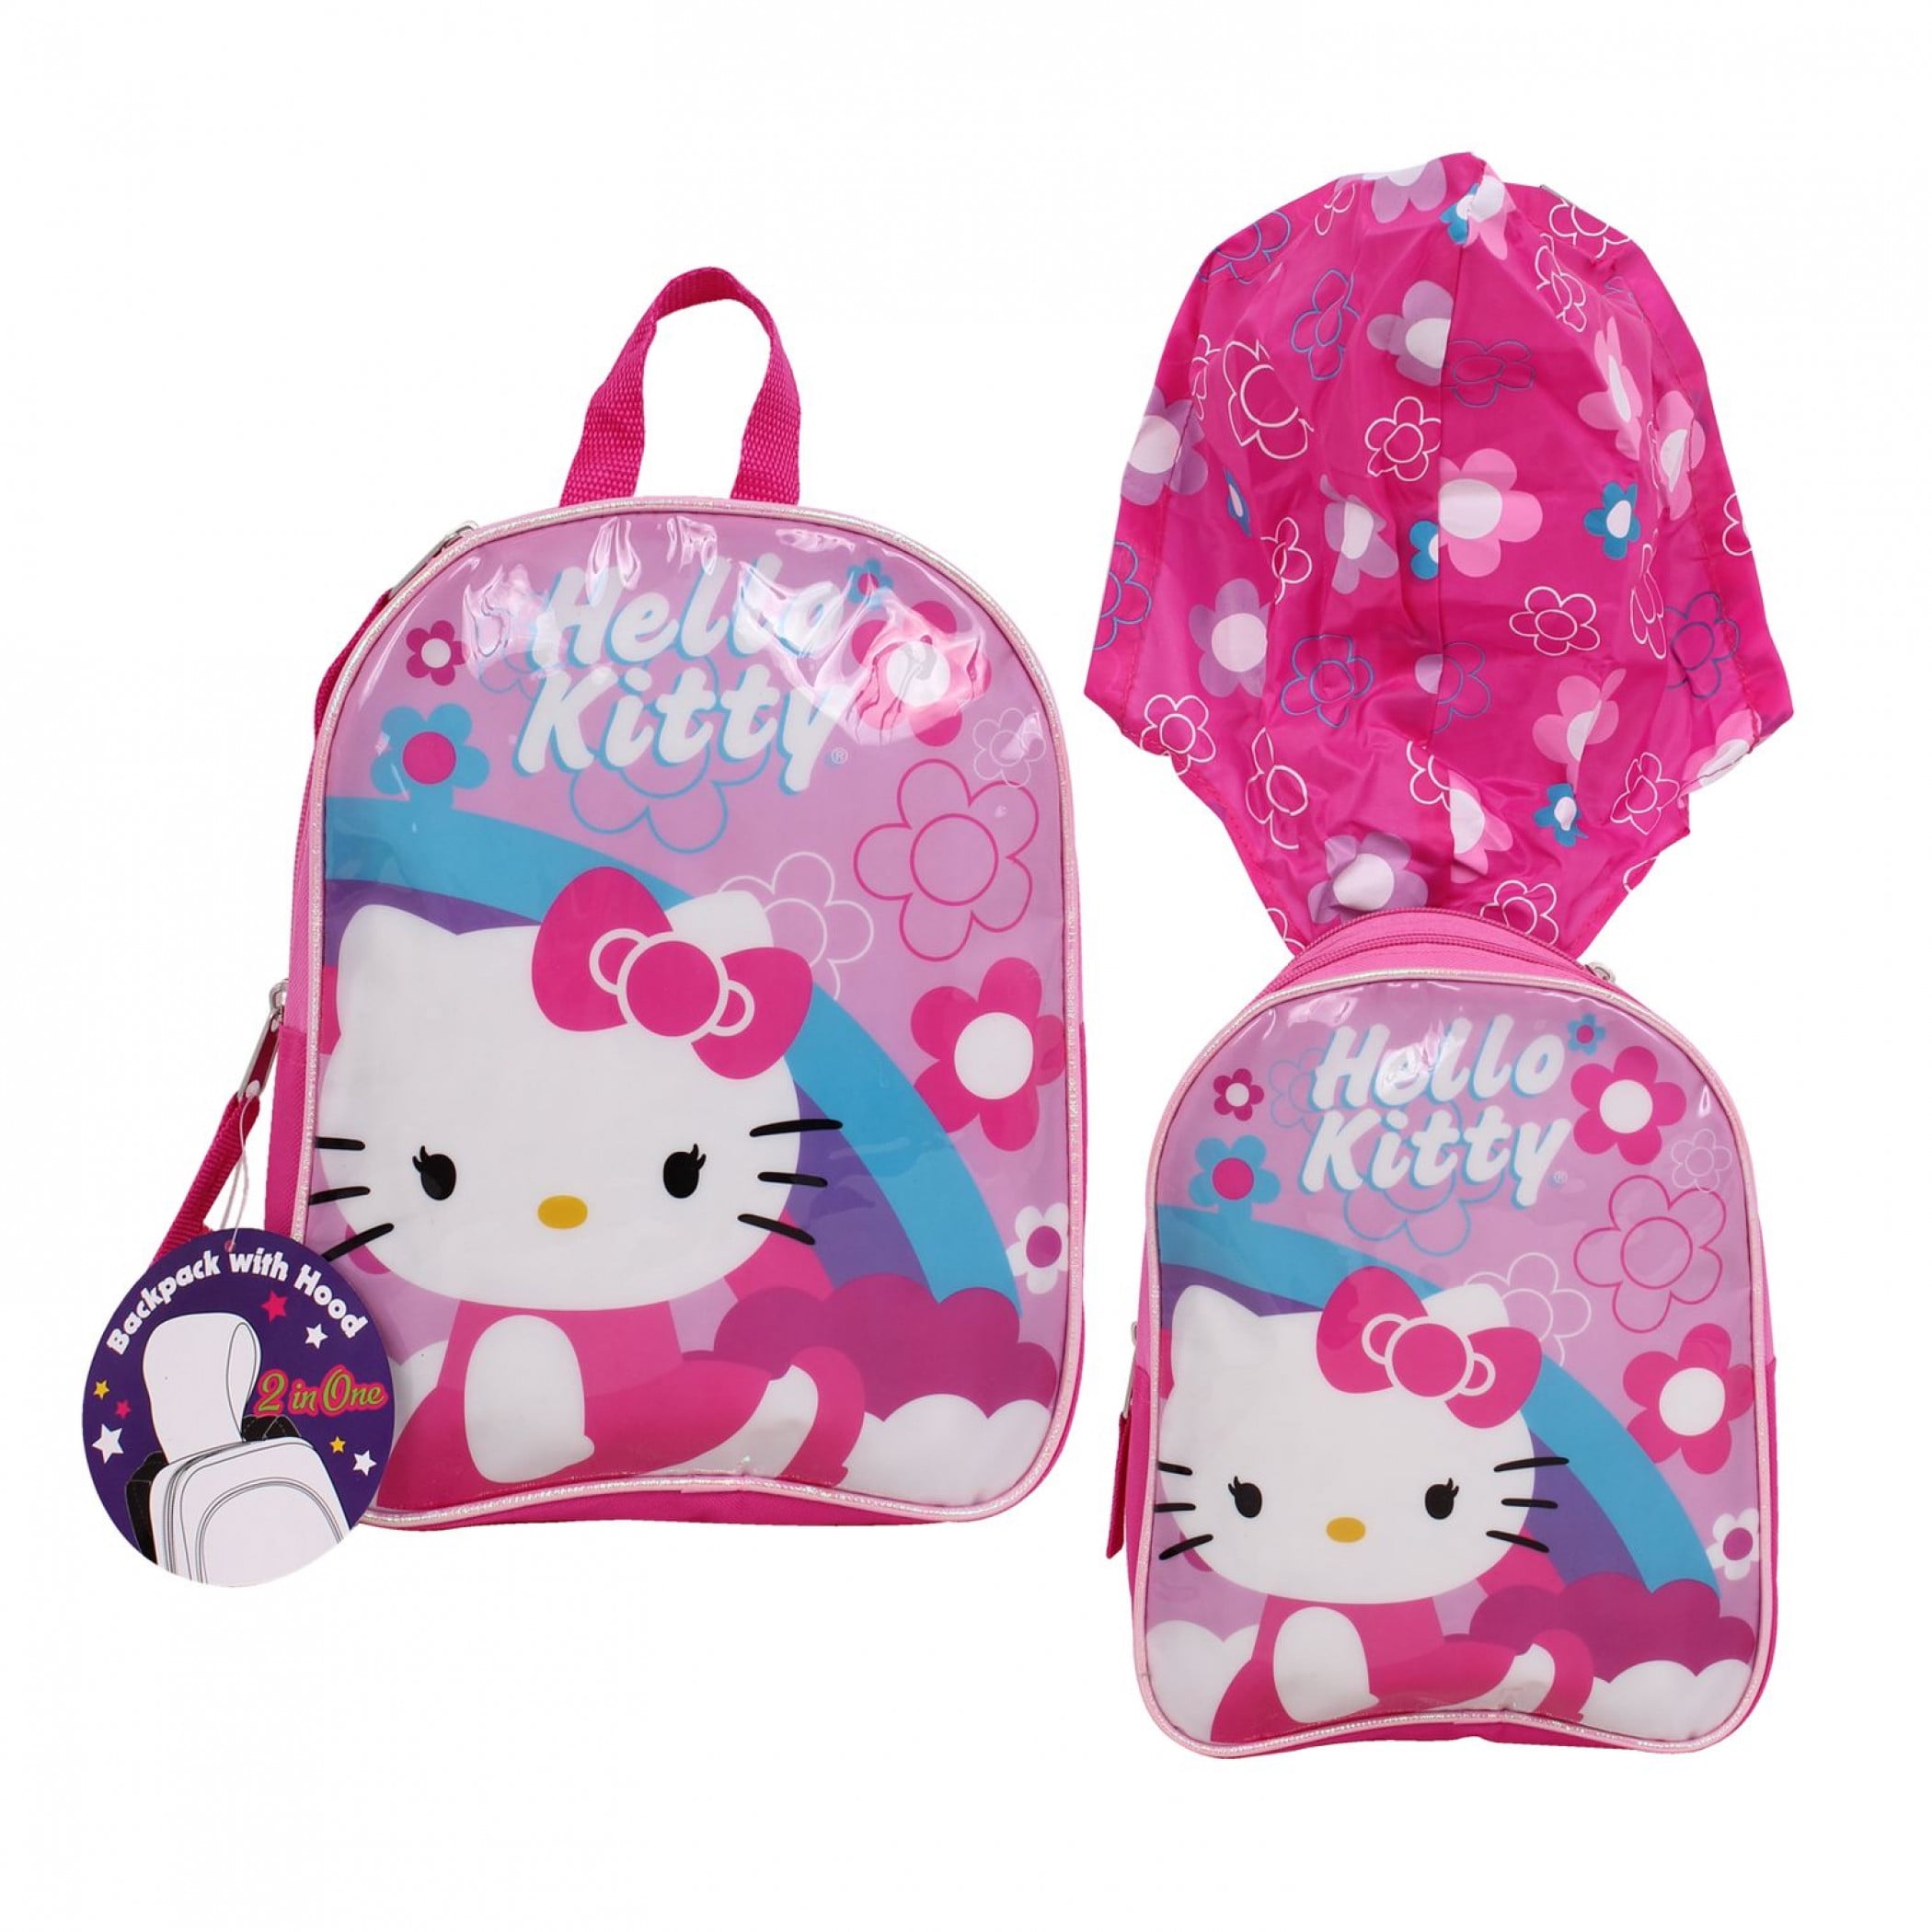 Lace up Bag Rugsack for Children Party Gift Hello Kitty 